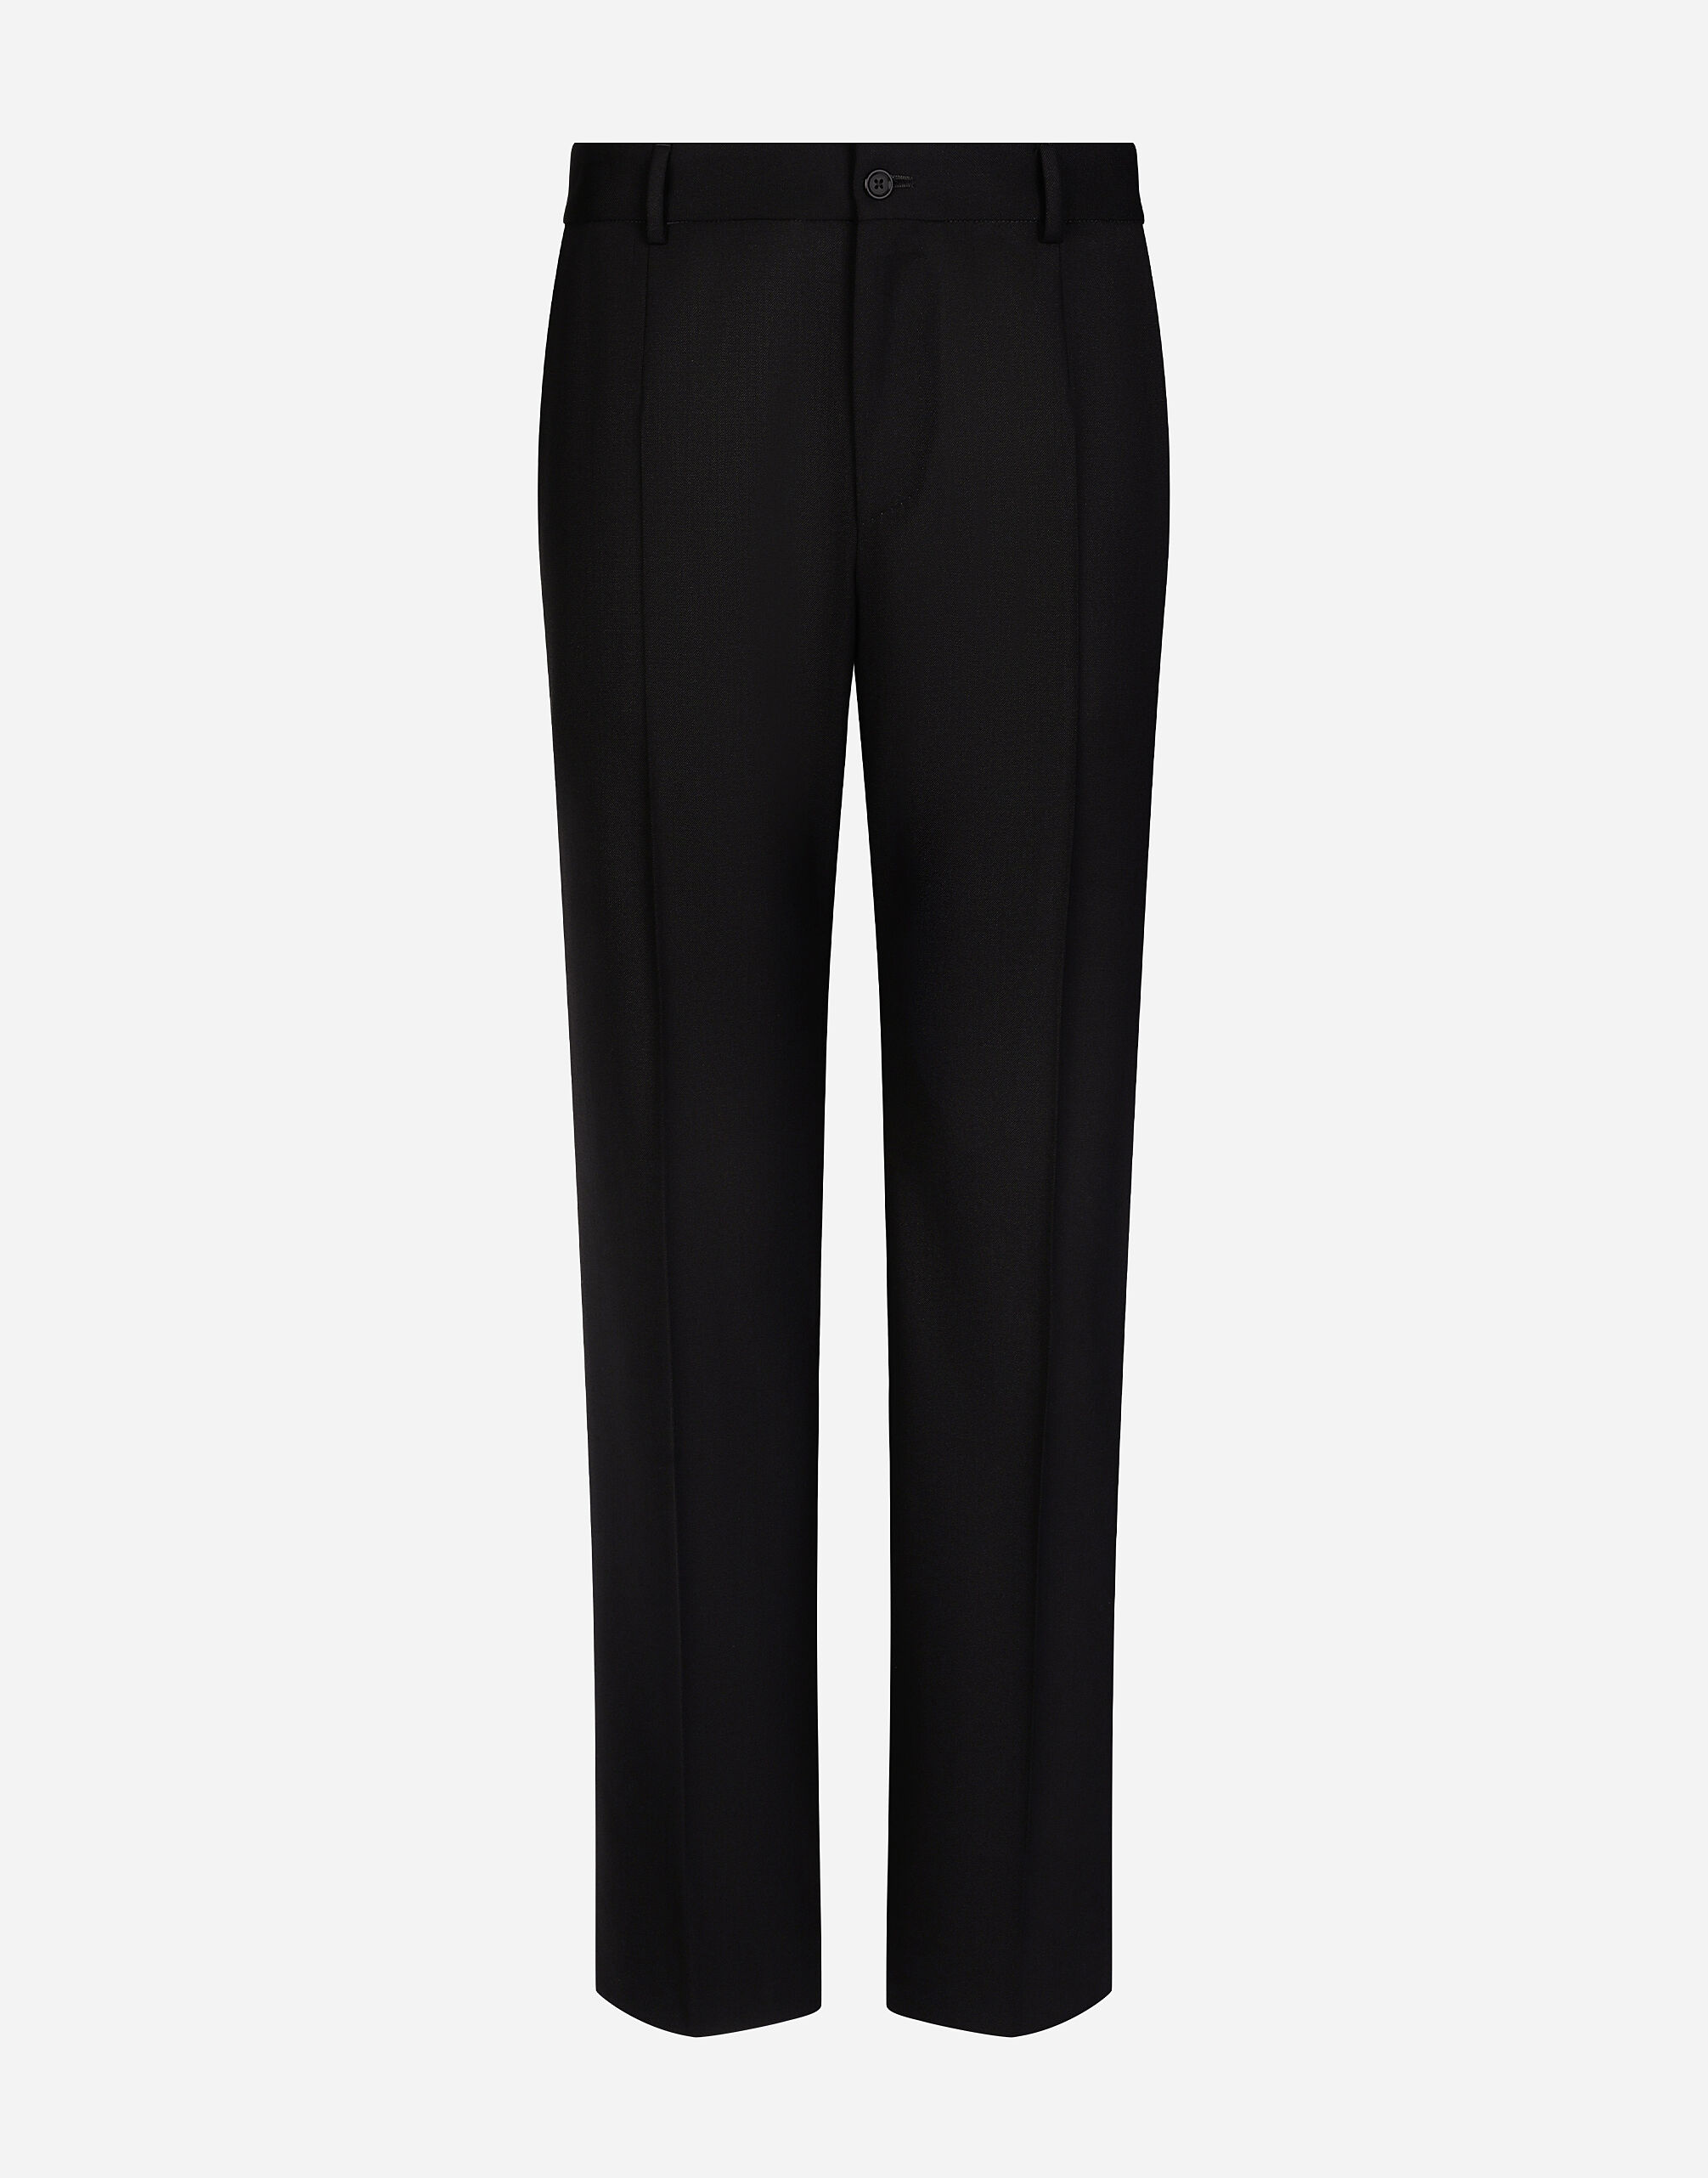 ${brand} Tailored stretch wool pants ${colorDescription} ${masterID}